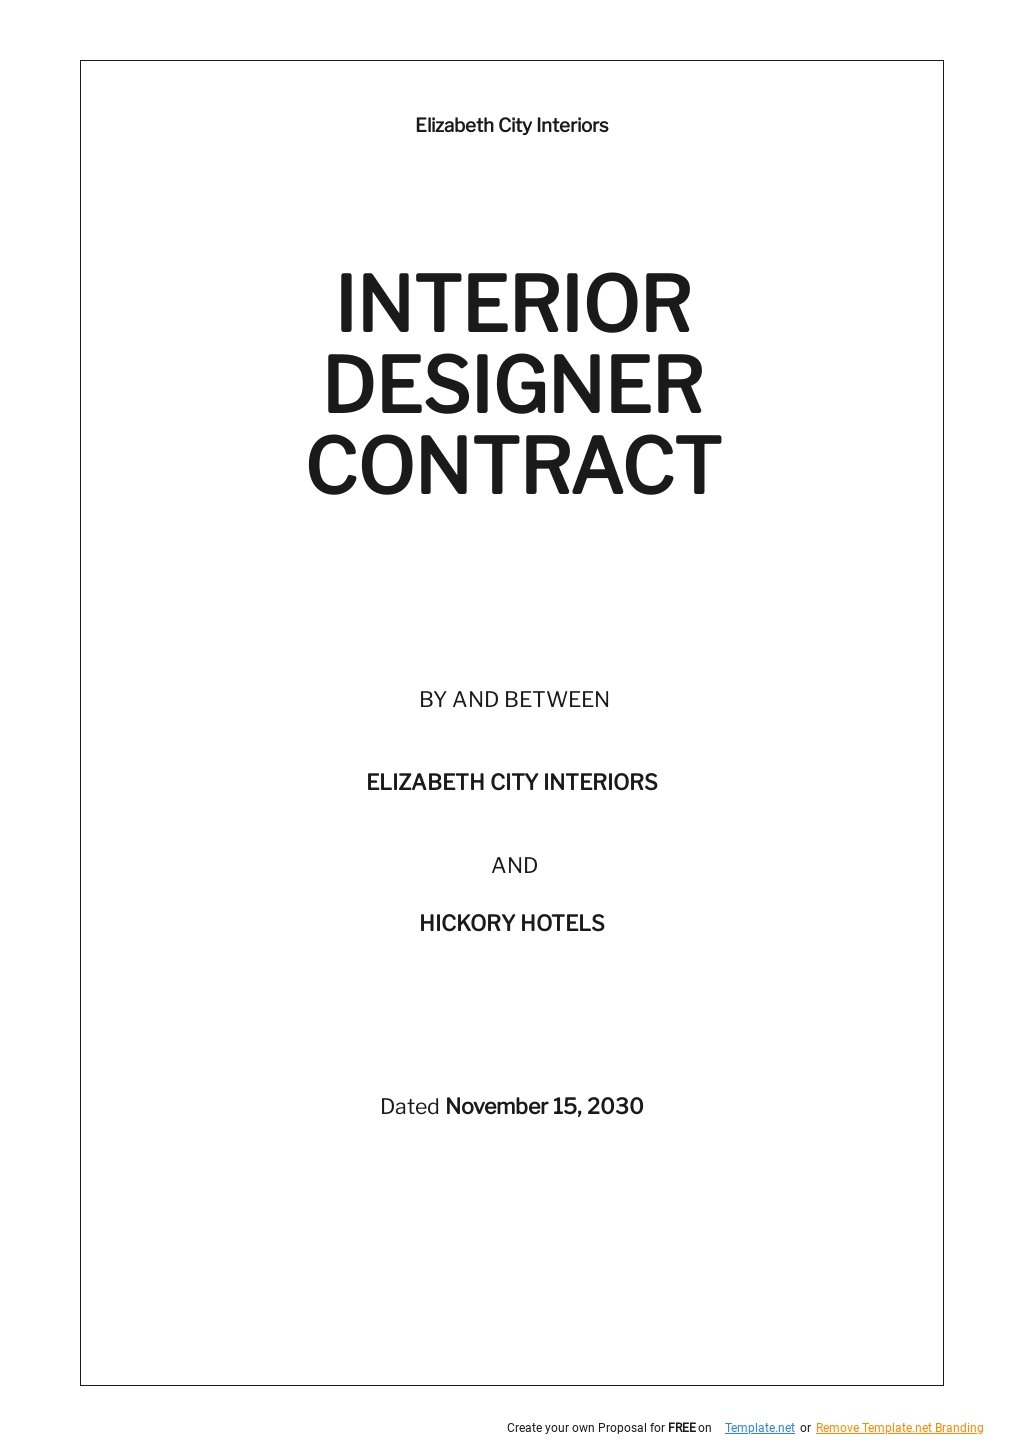 Contract Template For Interior Design Services